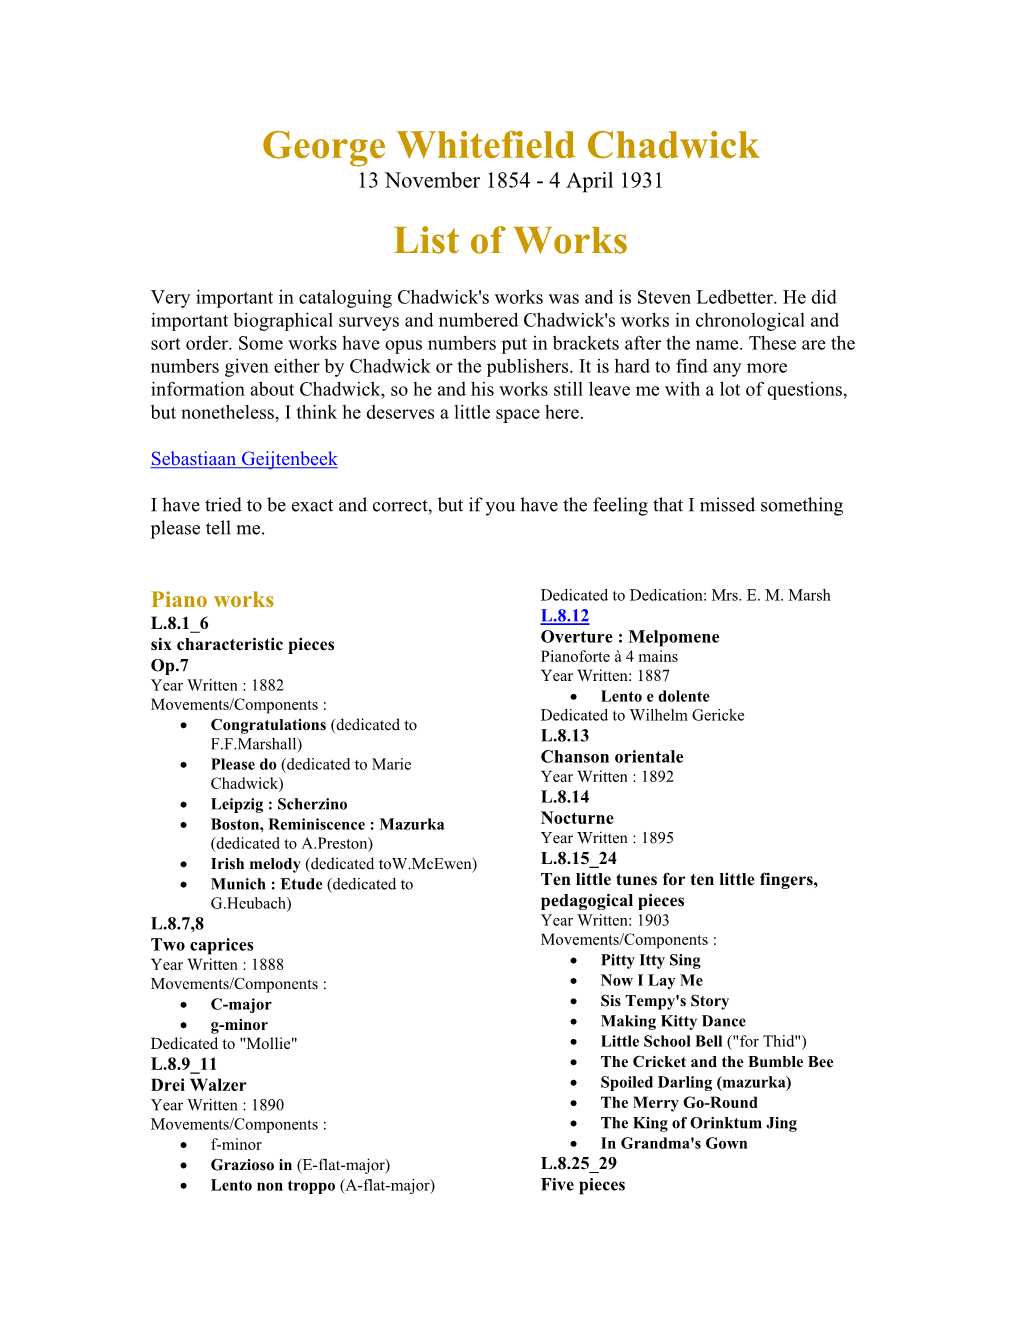 George Whitefield Chadwick List of Works